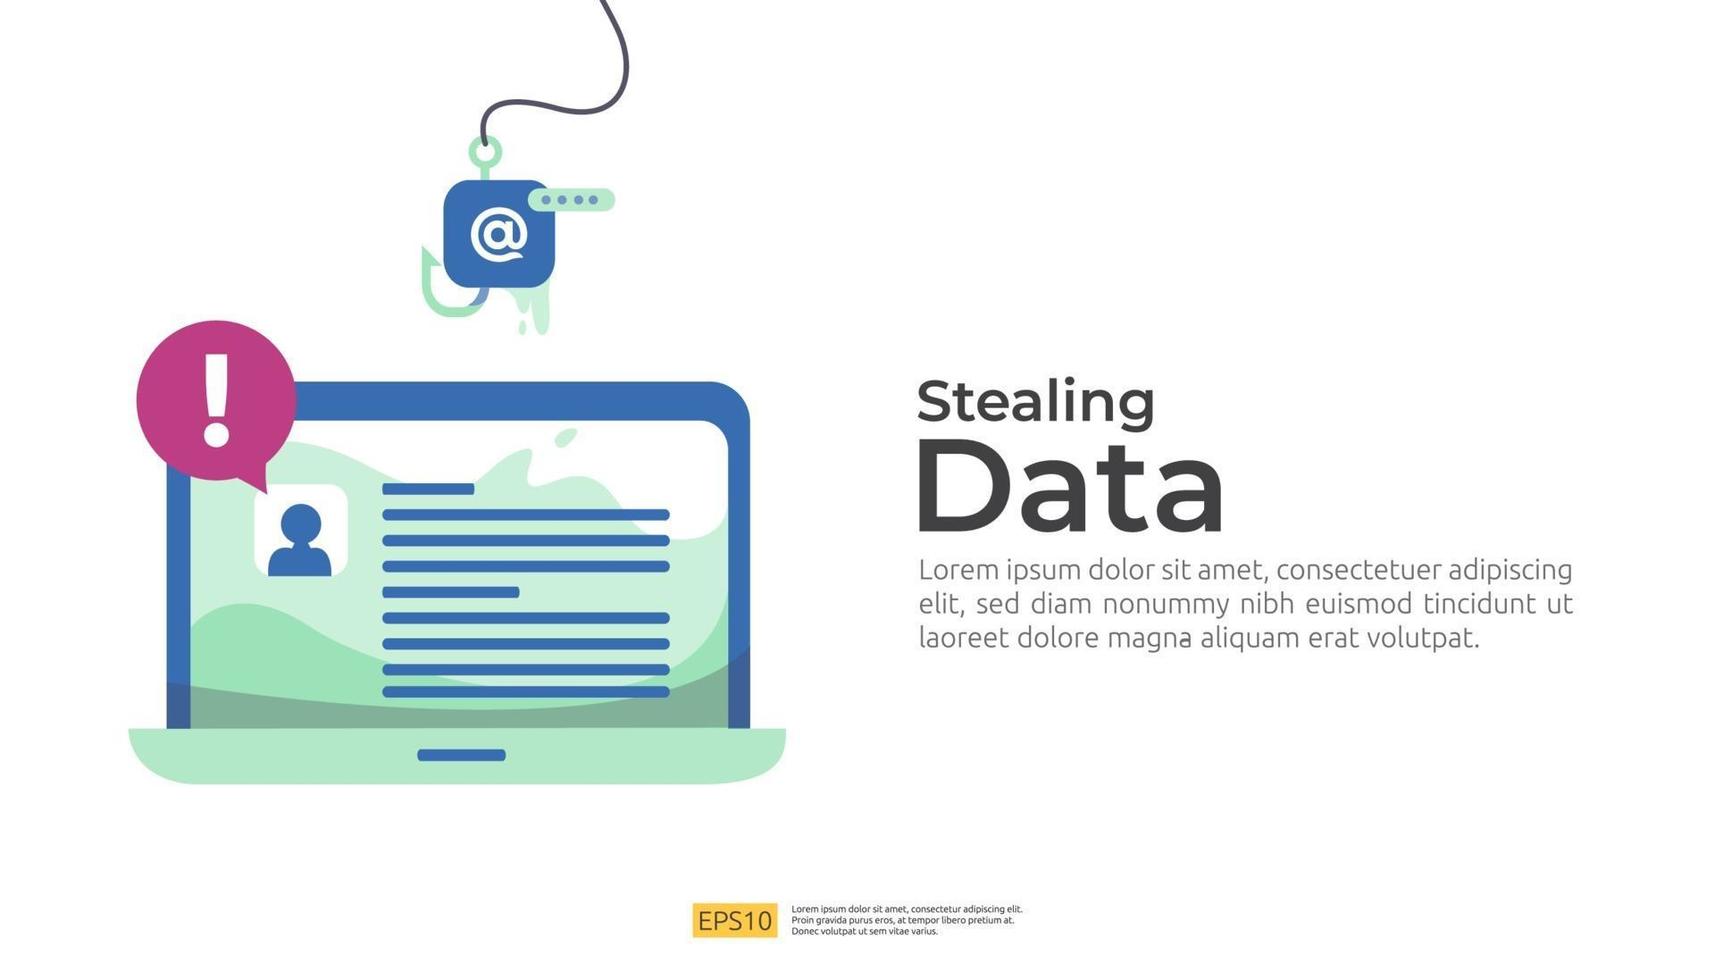 password phishing attack. stealing personal data concept illustration vector